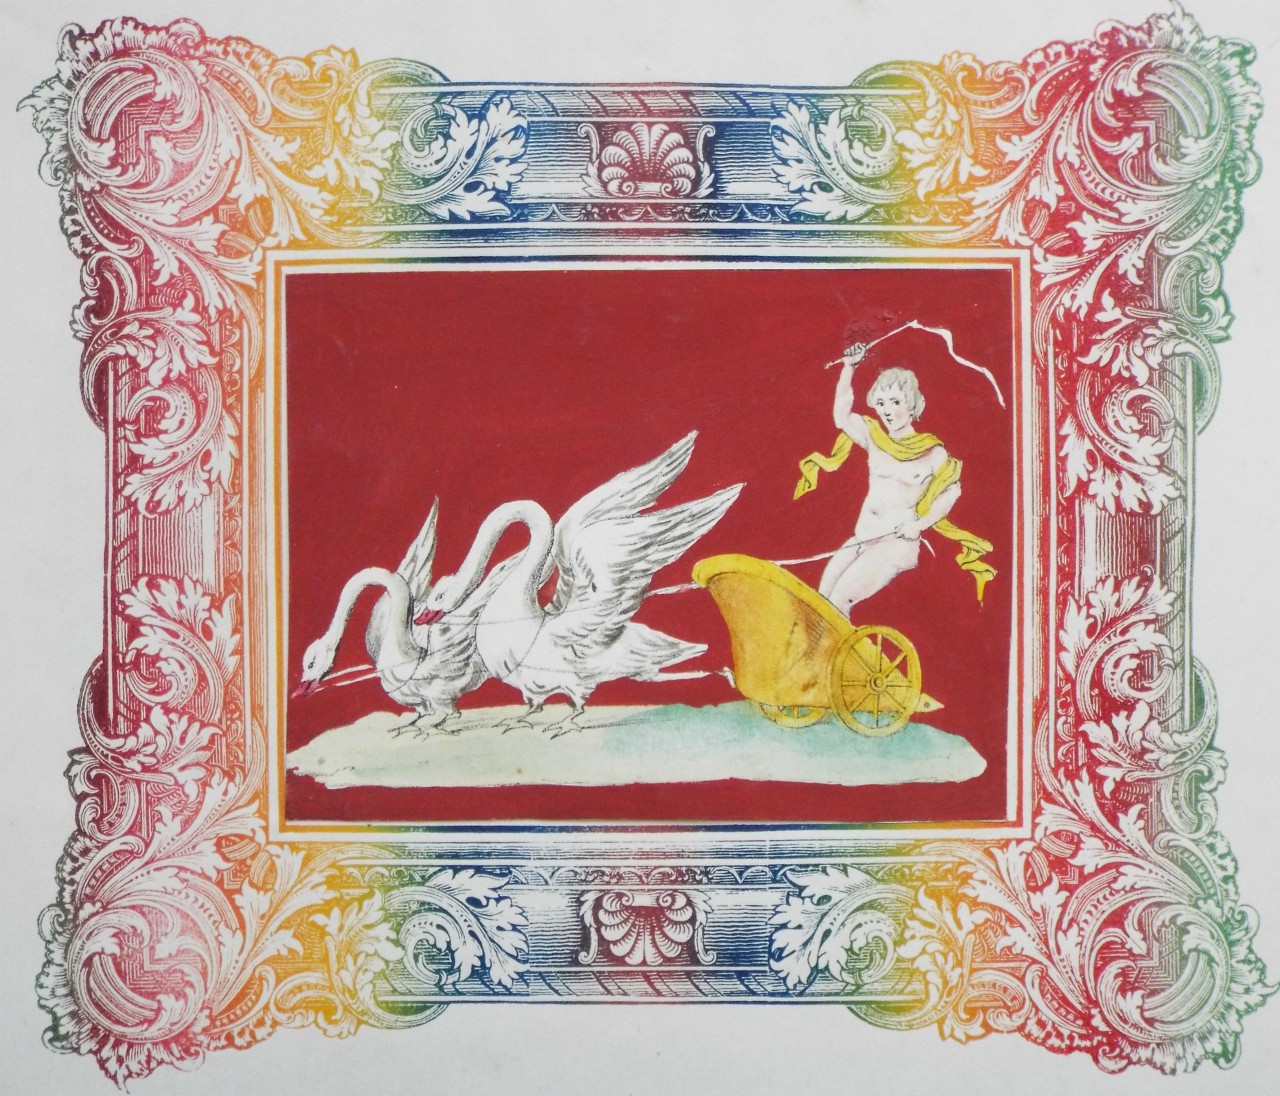 Chromo-lithograph - Apollo driving a golden chariot pulled by two swans